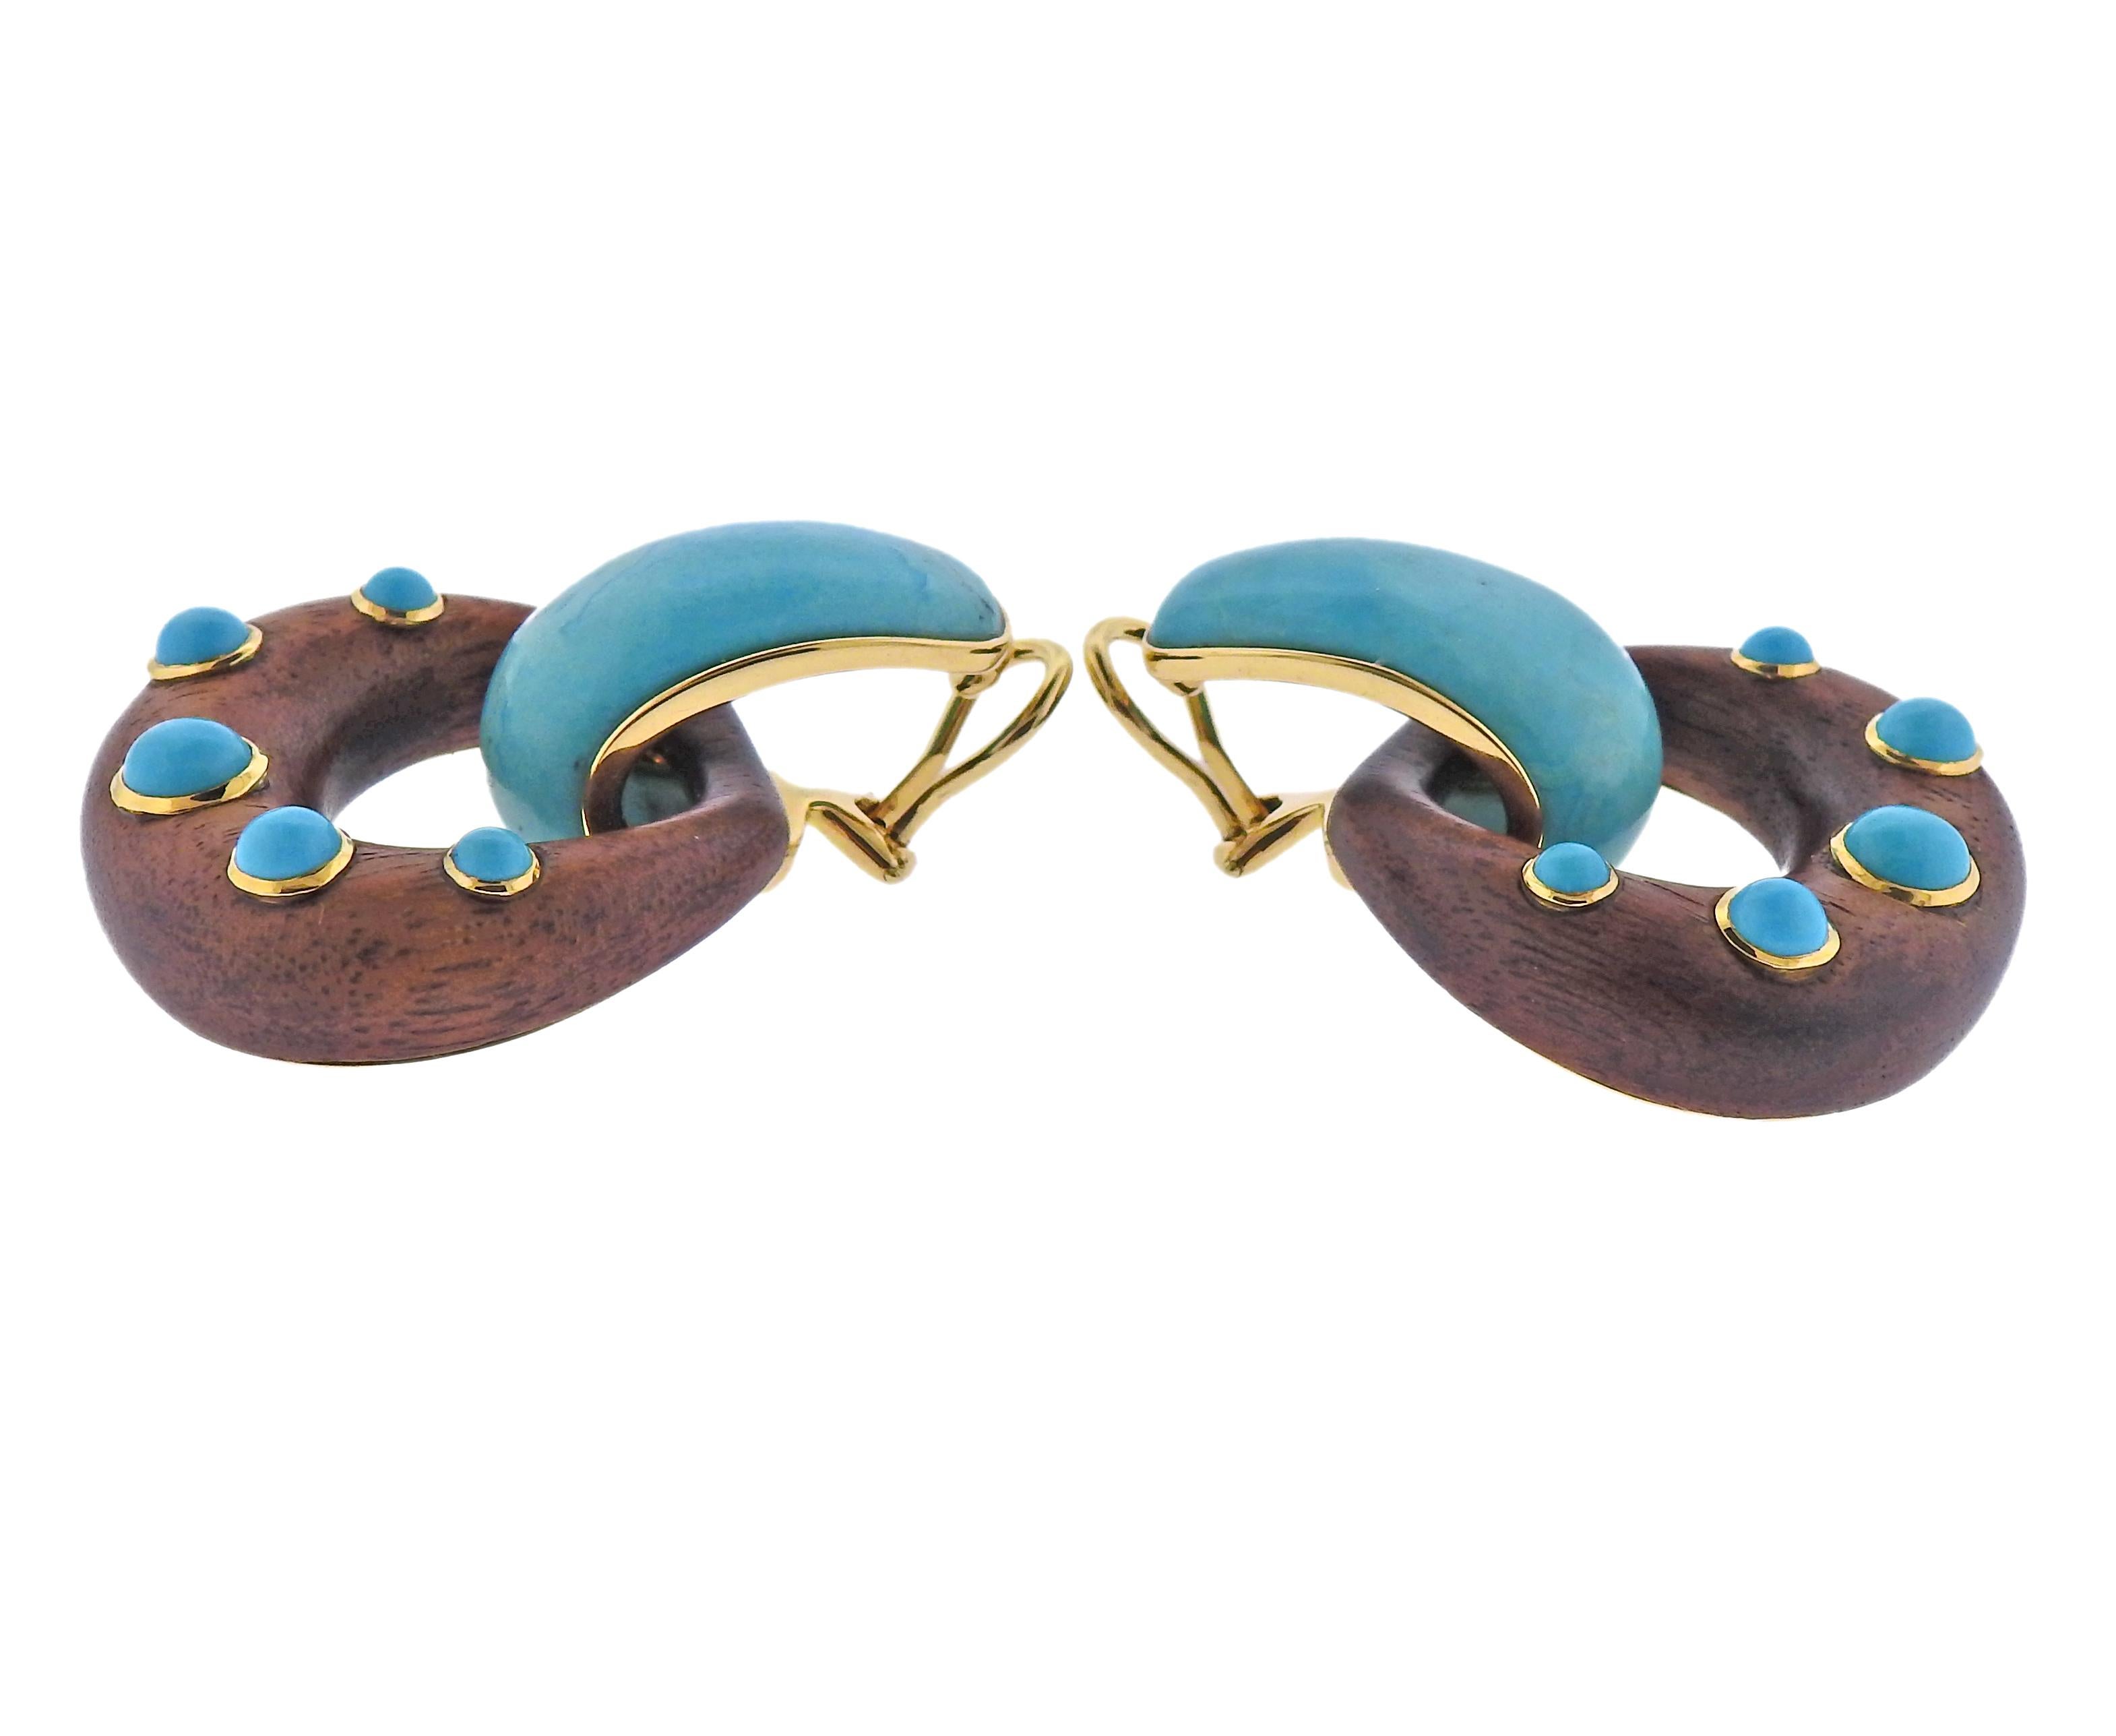 Brand new Seaman Schepps pair of versatile earrings, can be worn as doorknockers or hoops alone. Set with wood and turquoise. Can be purchased separately: hoops $4100; pendants $4300. Come with box.  Earrings are 38mm long. Pendants 28mm x 31mm.